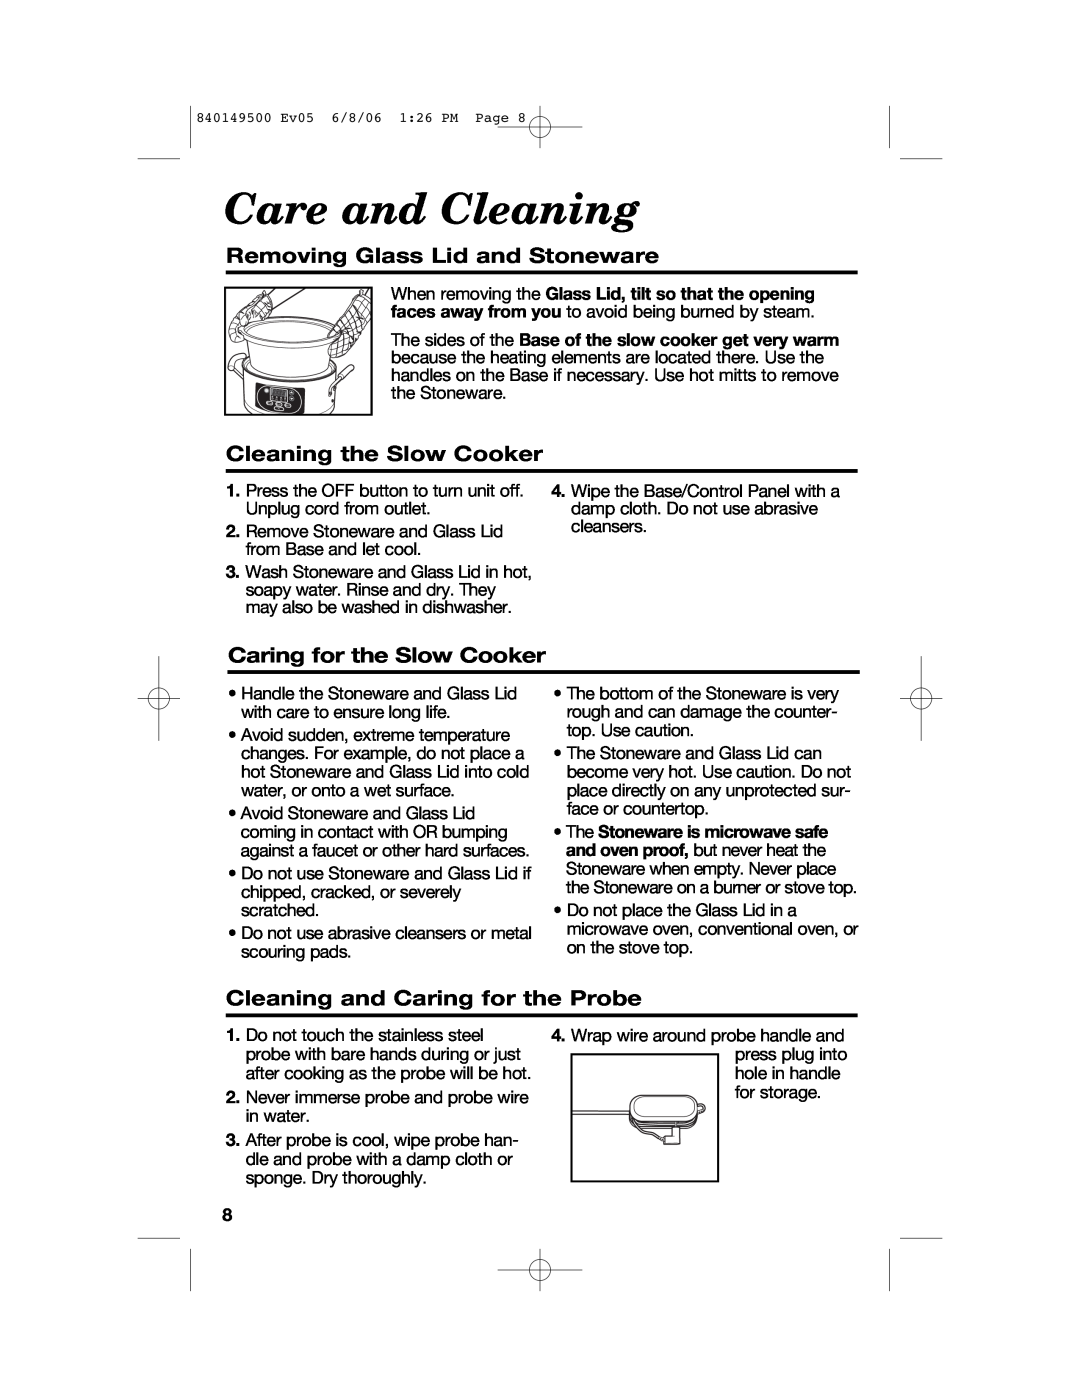 Proctor-Silex 840149500 manual Care and Cleaning, Removing Glass Lid and Stoneware, Cleaning the Slow Cooker 